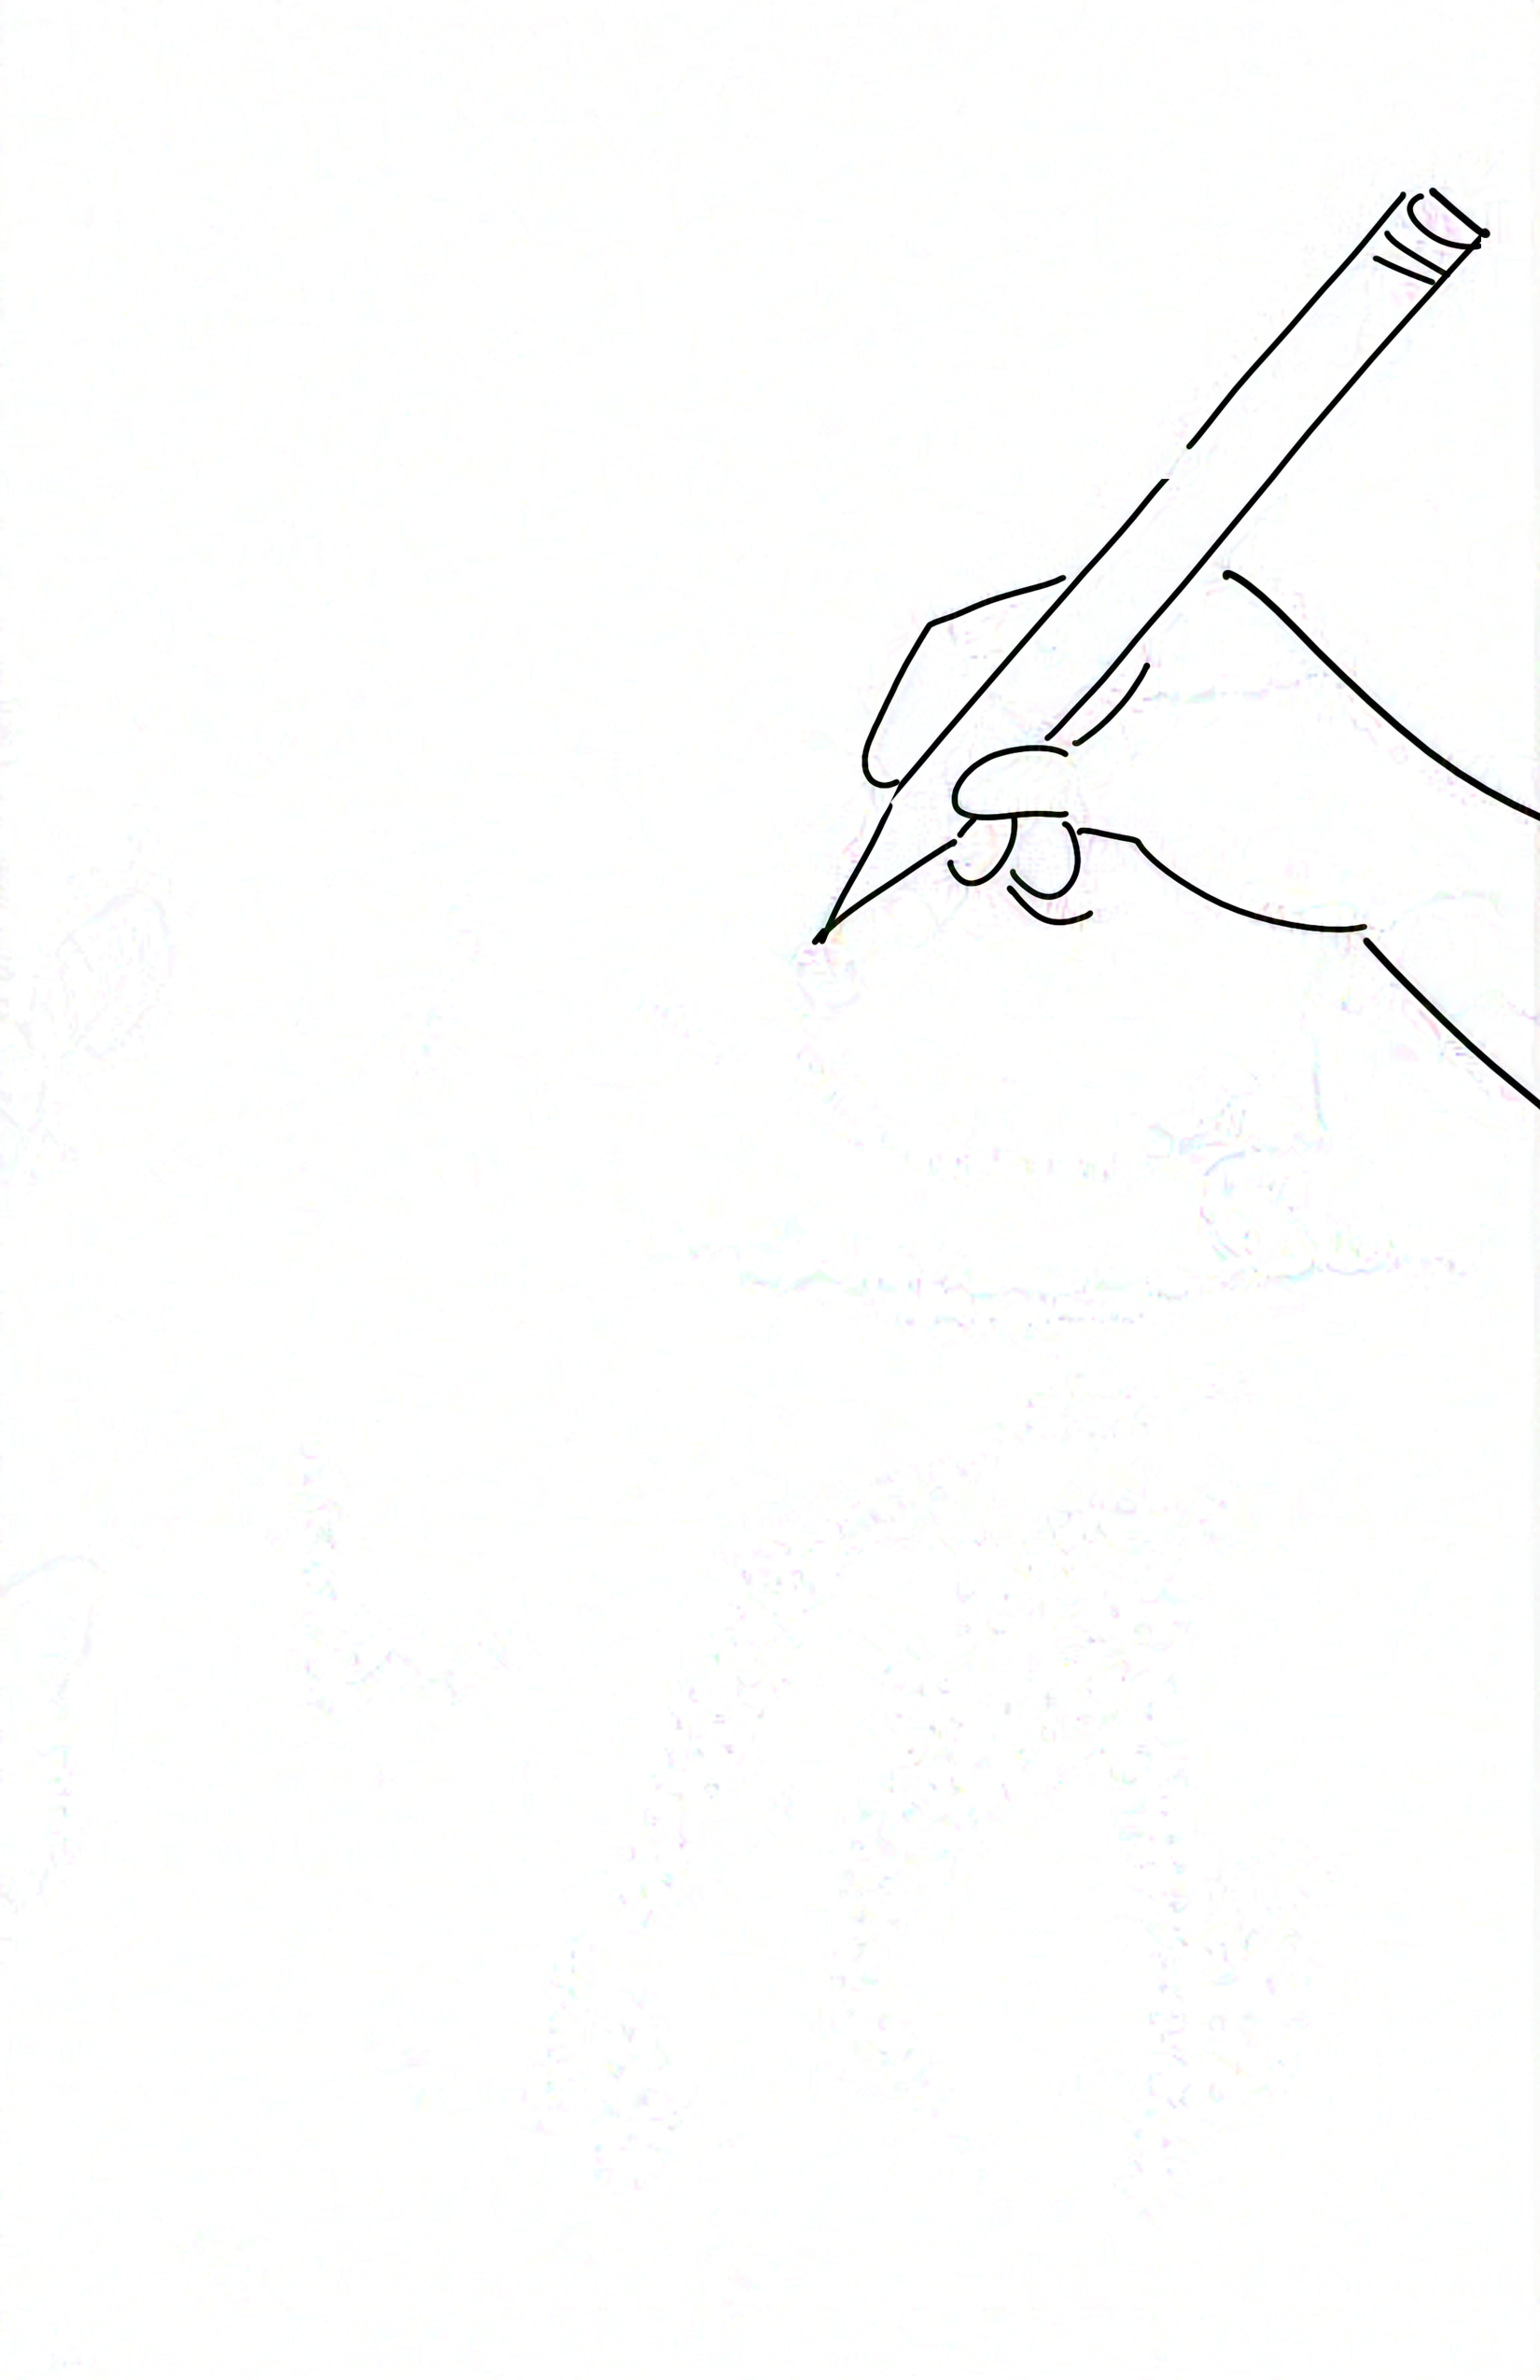 The person's hand hovering while holding a pencil in writing position over a blank background.